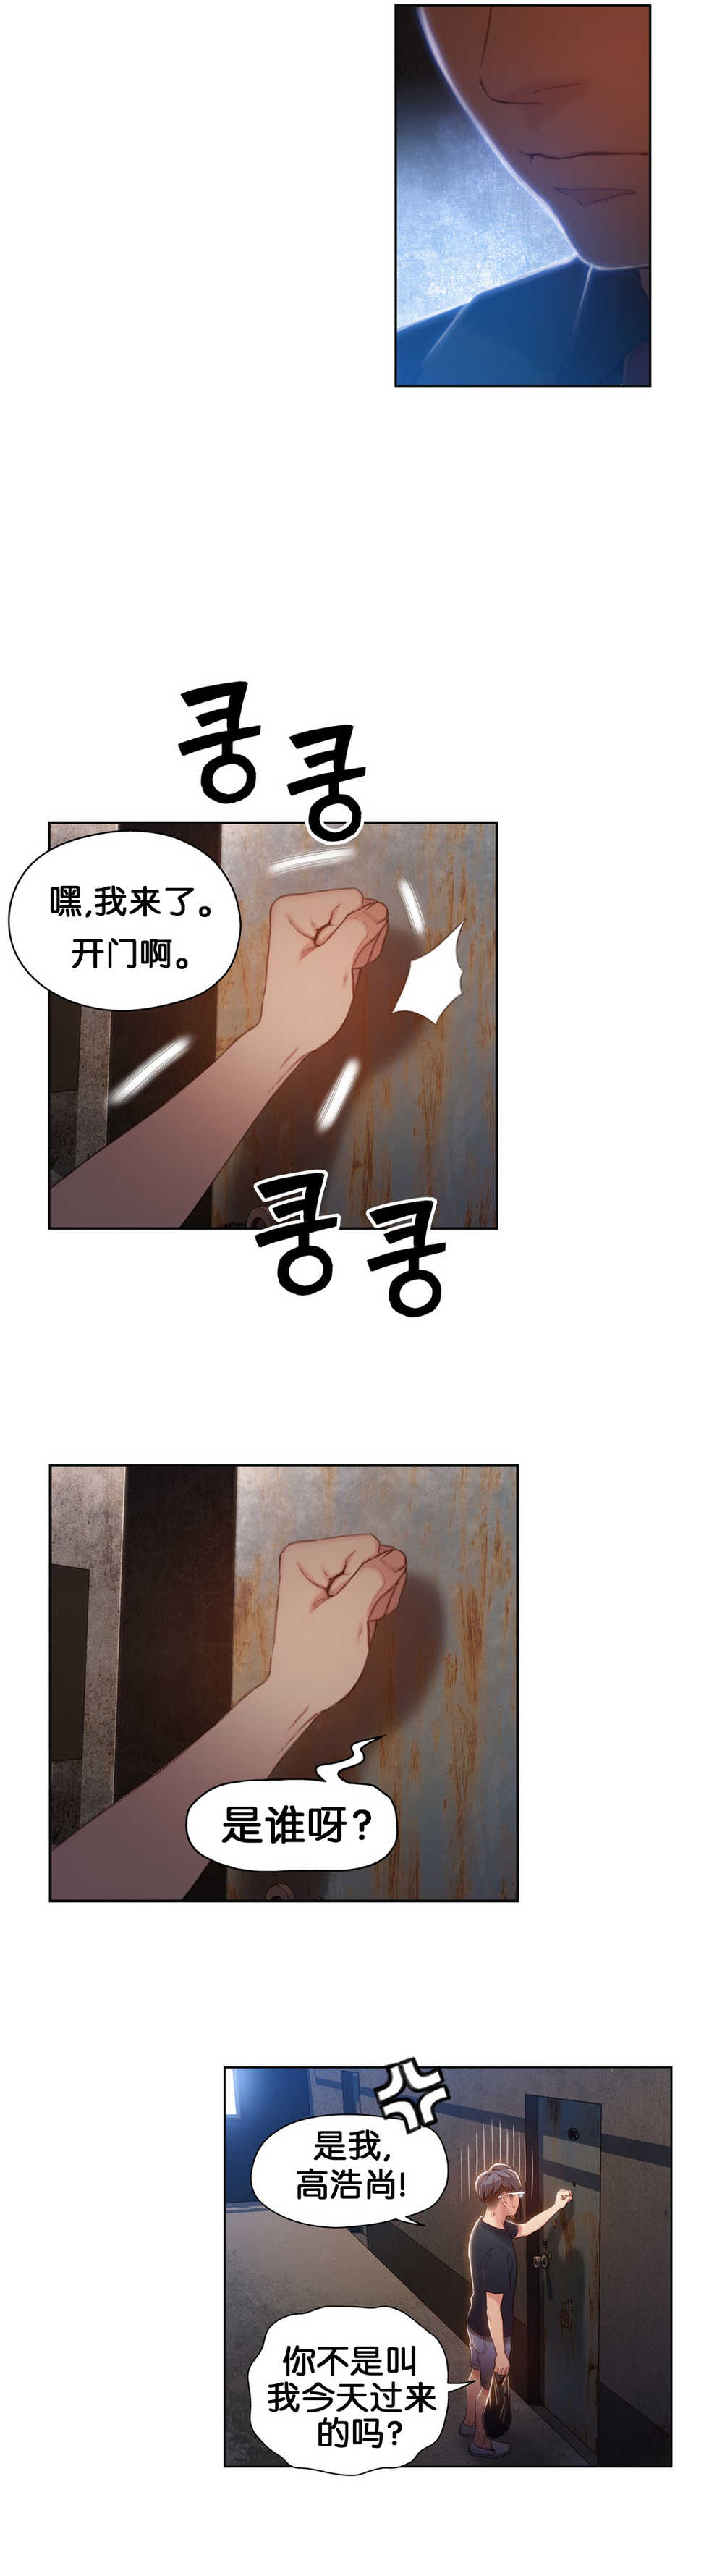 [BAK Hyeong Jun]Sweet Guy Ch.46-48(Chinese)(FITHRPG6) - Page 25